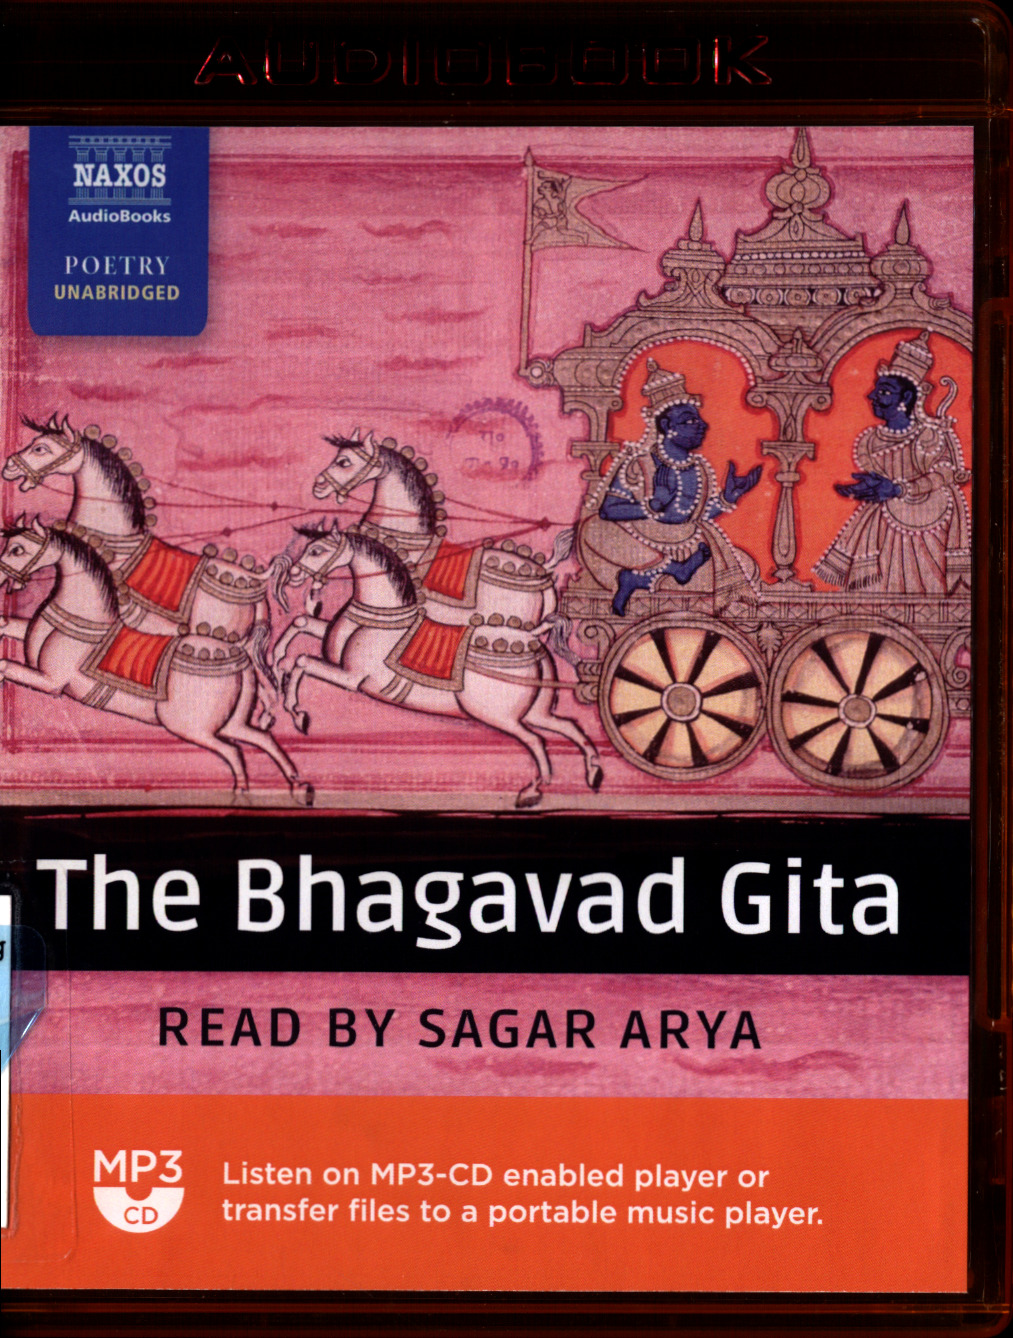 Book Cover of the audiobook The Bhagavad Gita